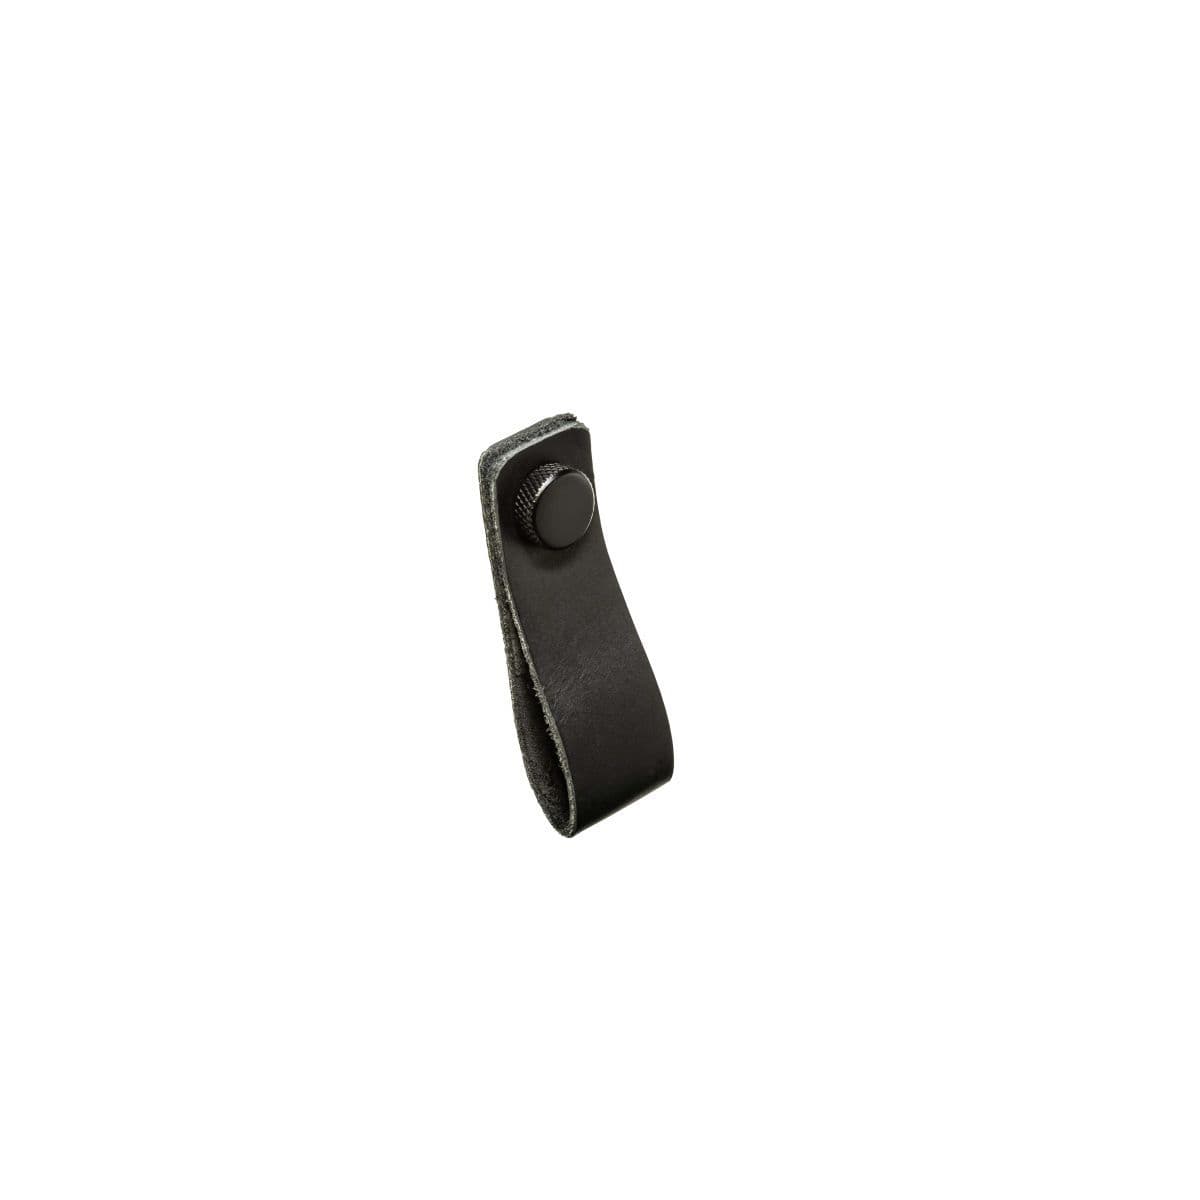 JEAKER LOOP PULL Cupboard Handle - 80mm x 25mm - BLACK or BROWN LEATHER finishes (PWS H1149.80)